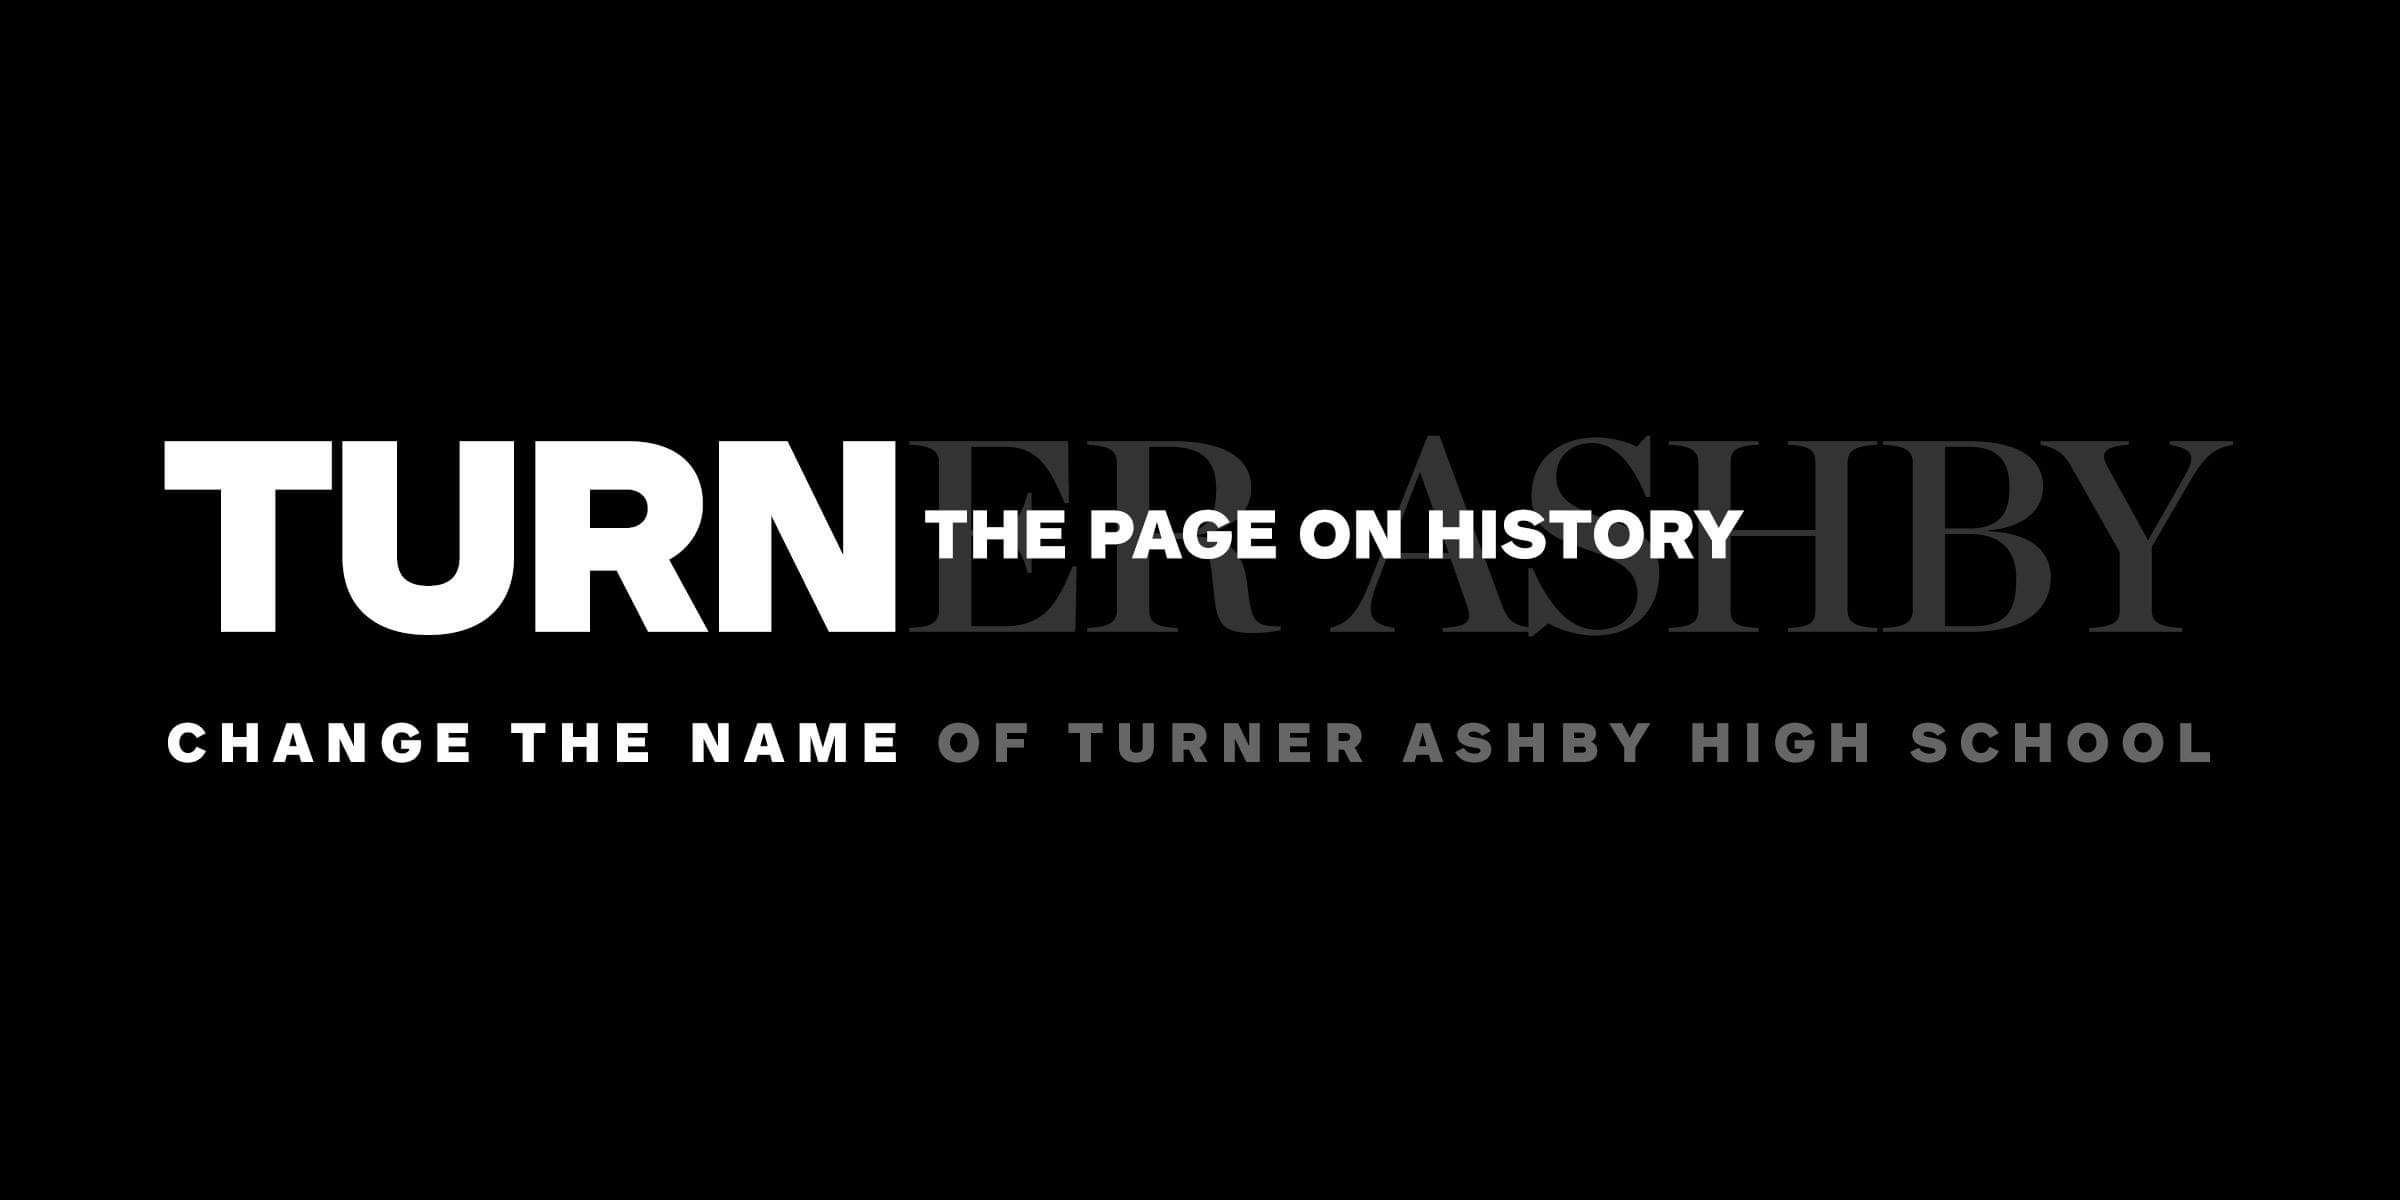 Change the name of Turner Ashby High School